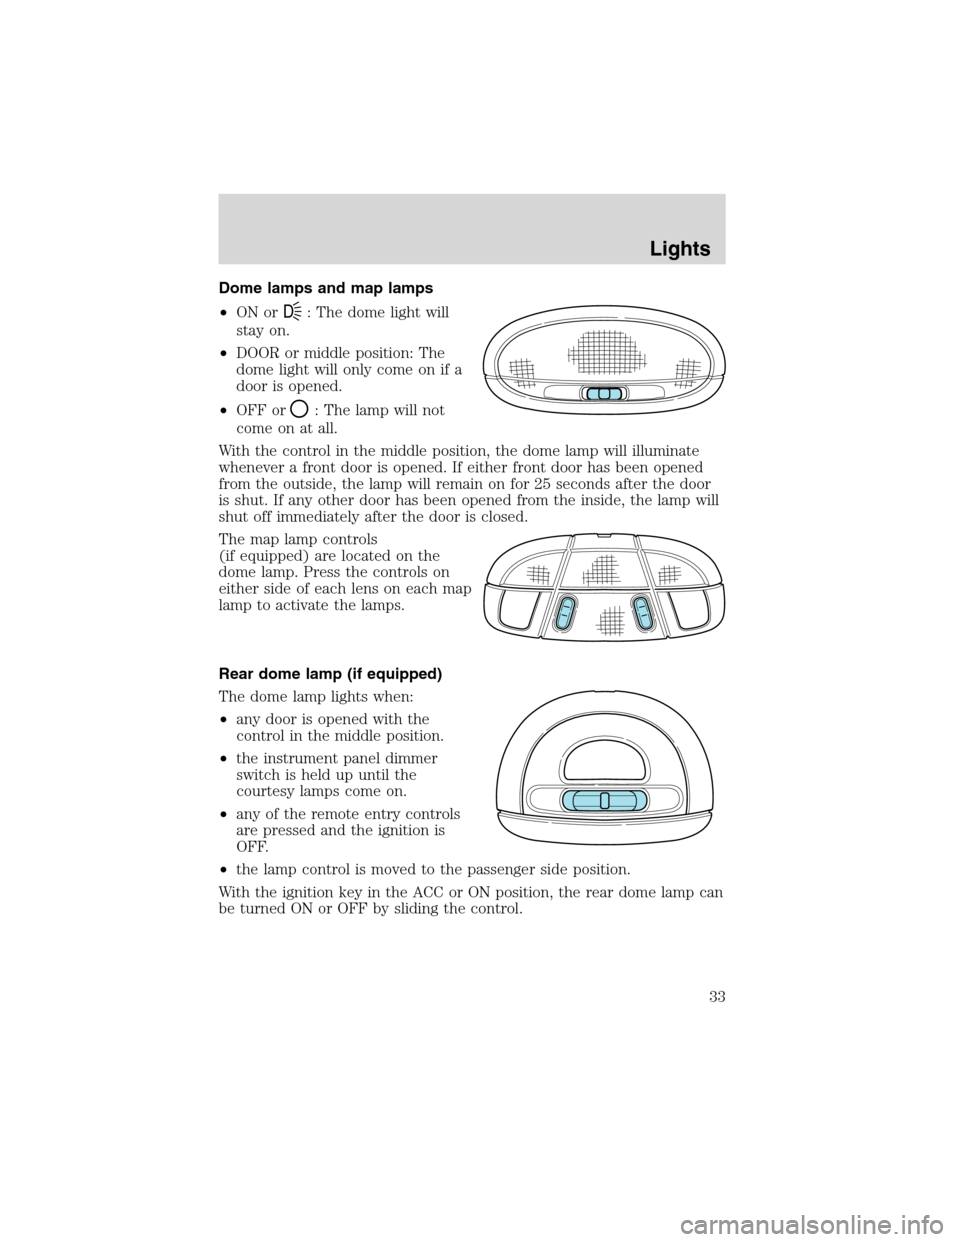 Mercury Sable 2003  Owners Manuals Dome lamps and map lamps
•ON or
D: The dome light will
stay on.
•DOOR or middle position: The
dome light will only come on if a
door is opened.
•OFF or
: The lamp will not
come on at all.
With t